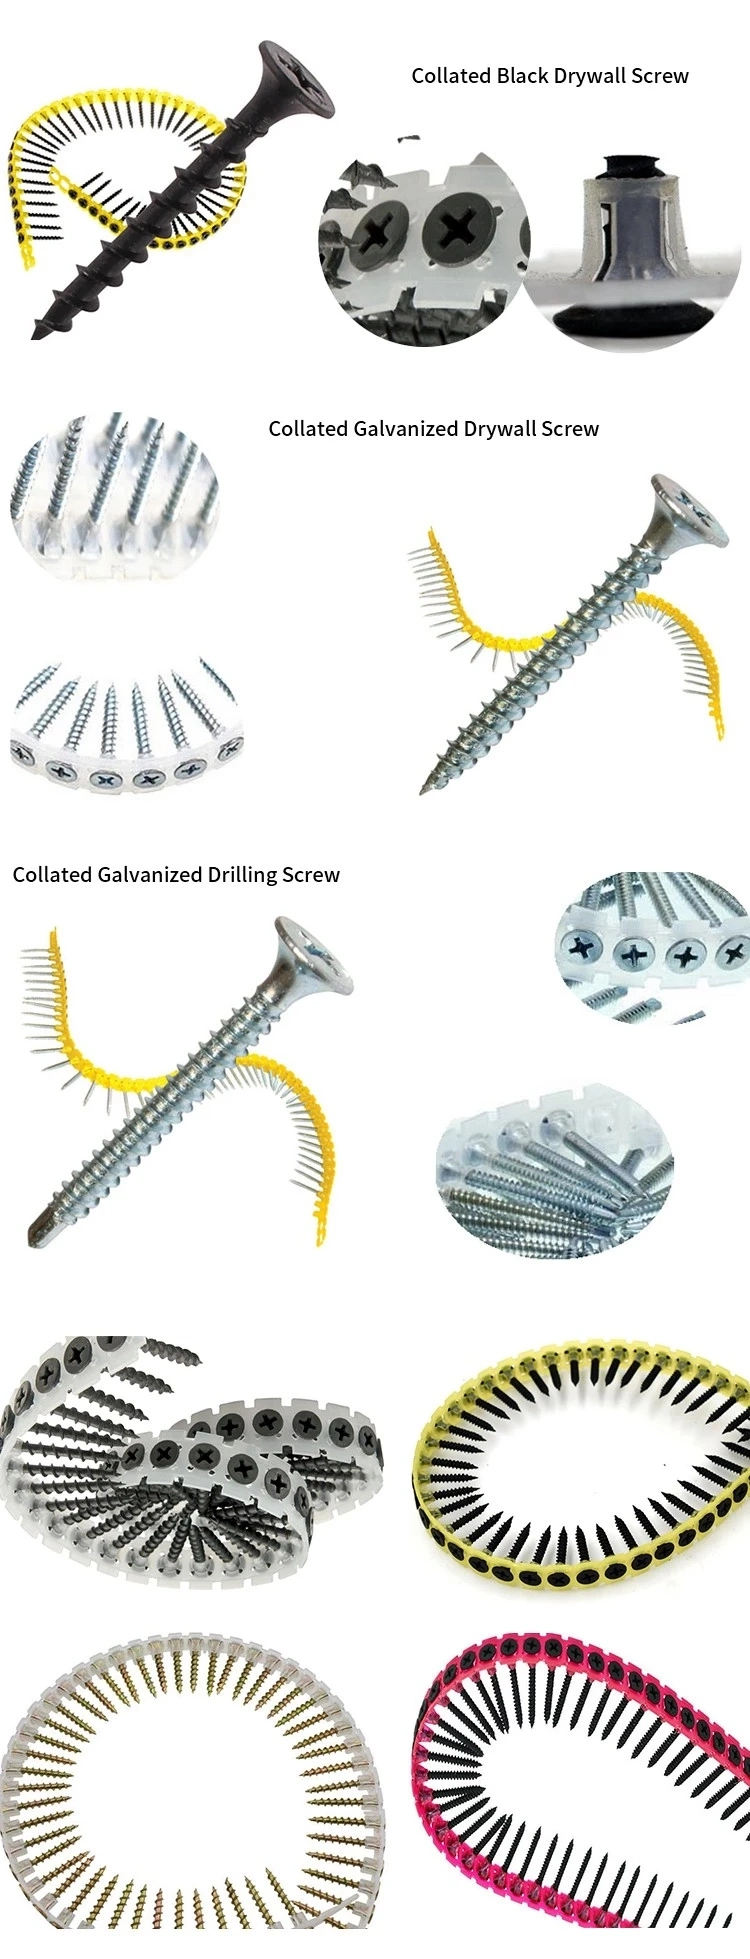 Drywall Collated Screw, Collated Tape Drywall Screw, Black Screw